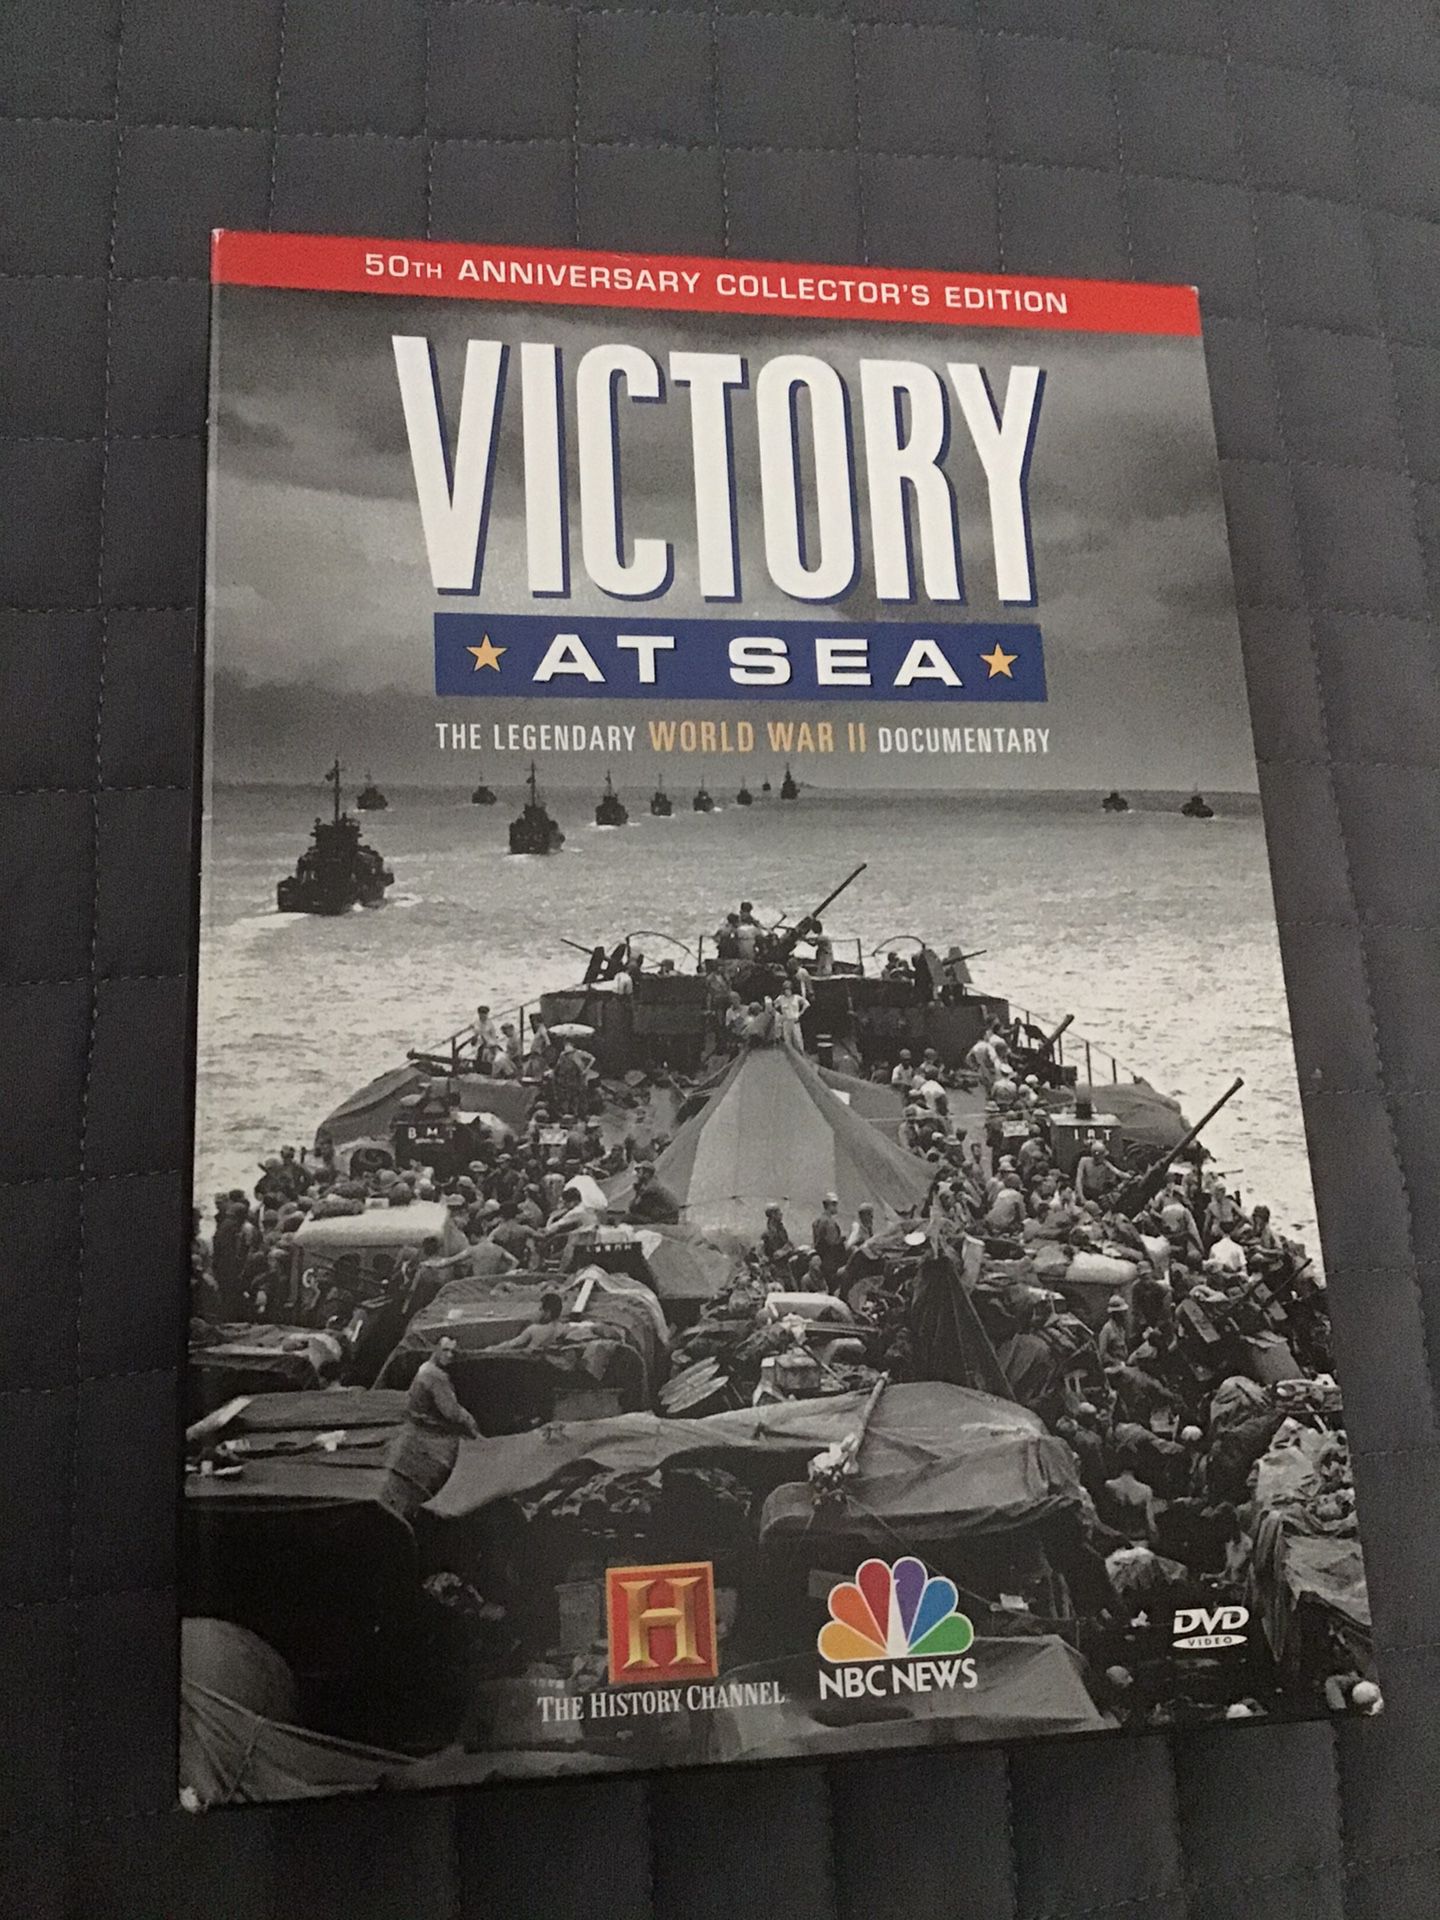 VICTORY AT SEA 50th Anniversary Collector’s edition